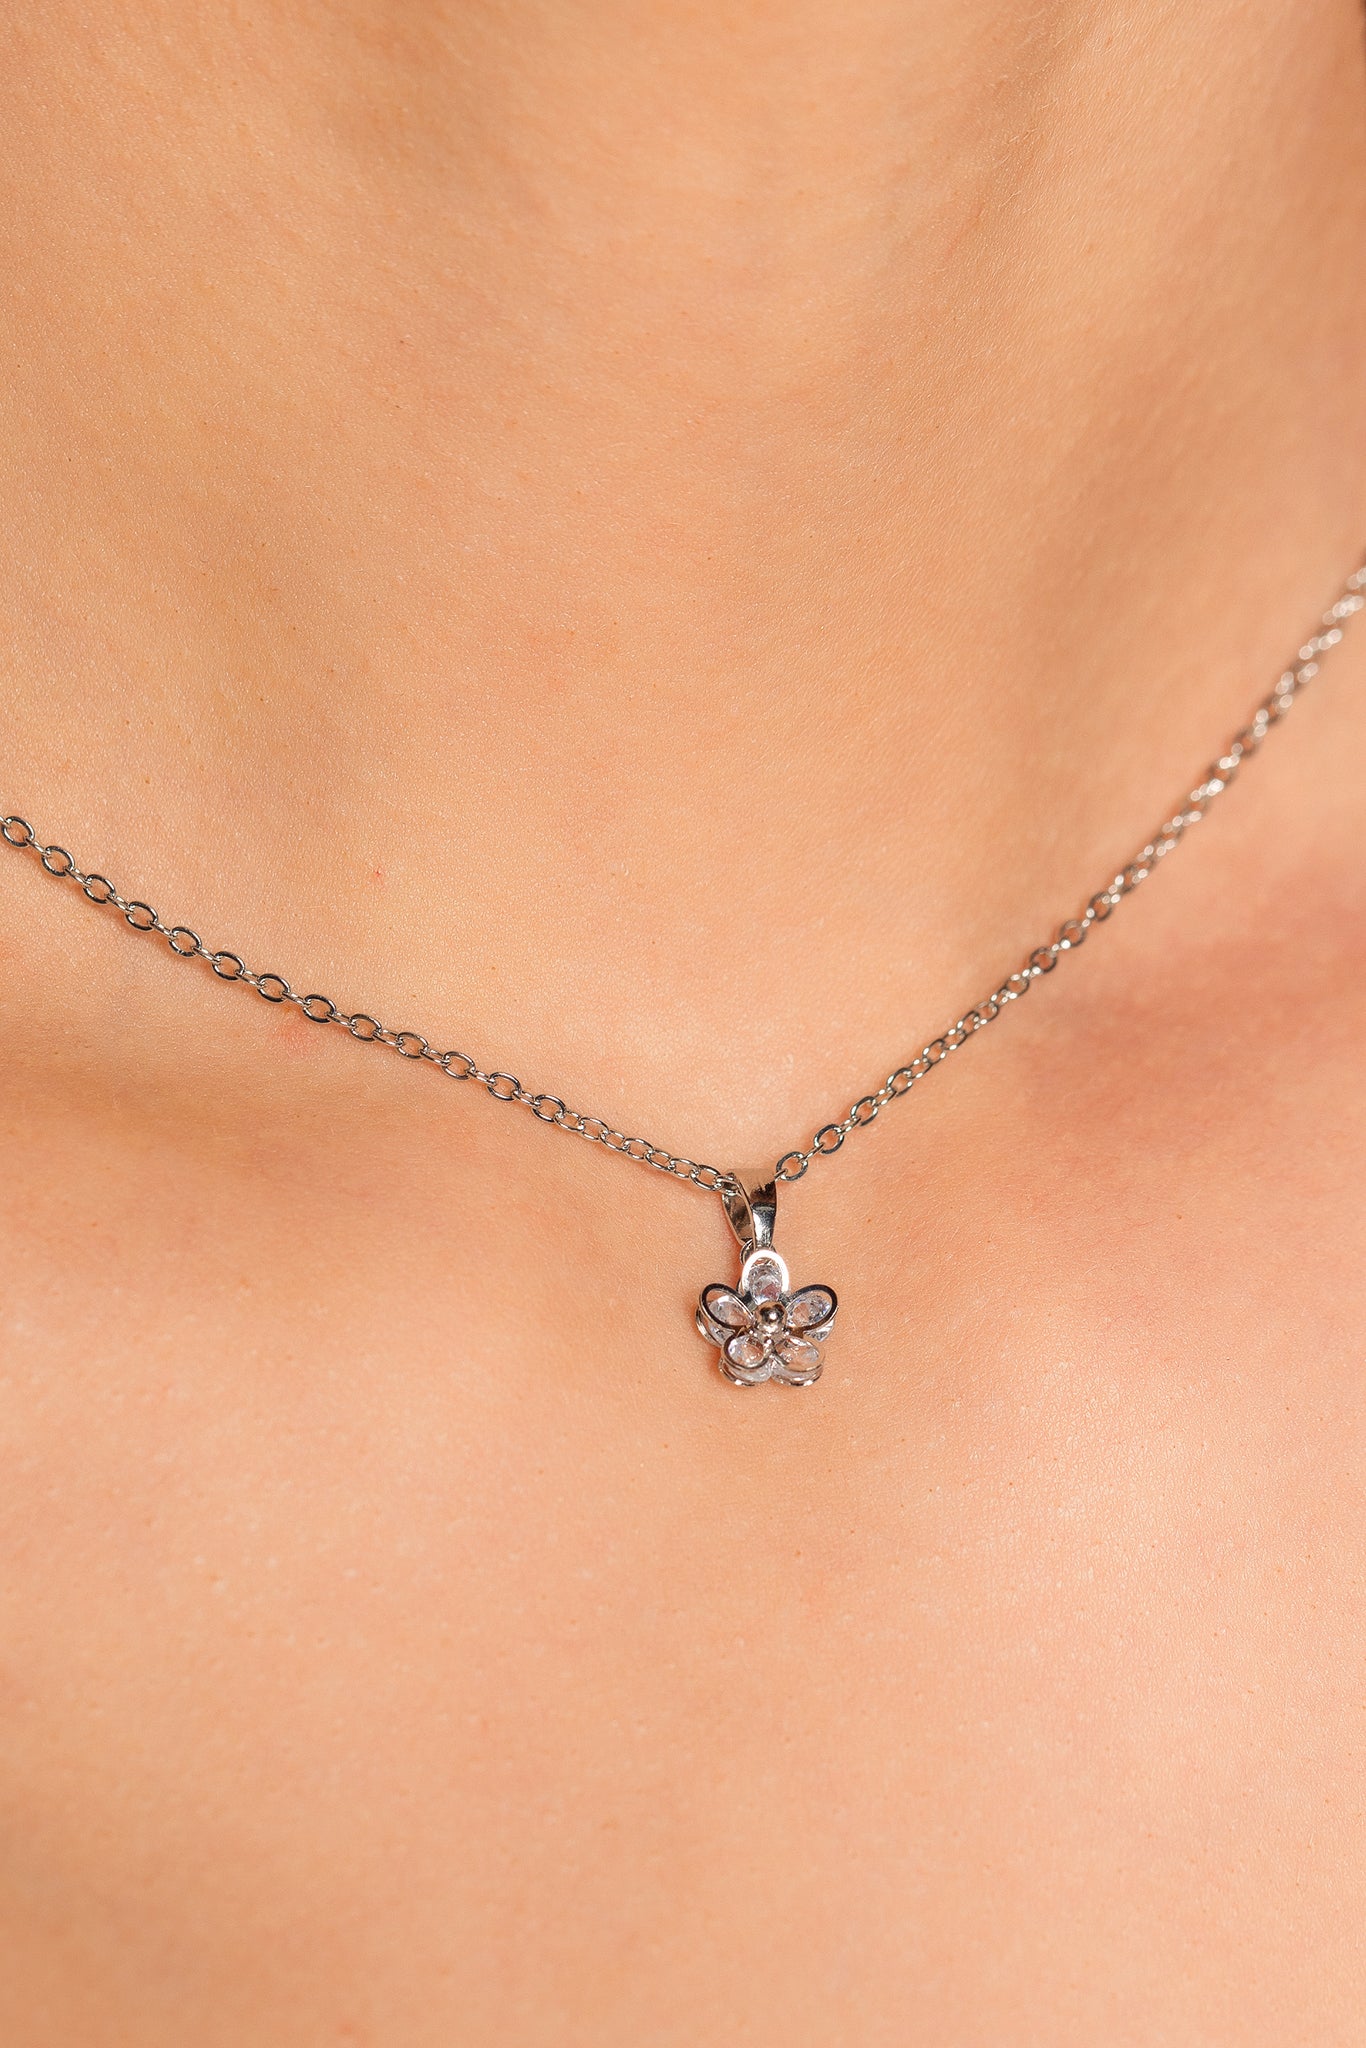 Necklace with Small Floral Pendant